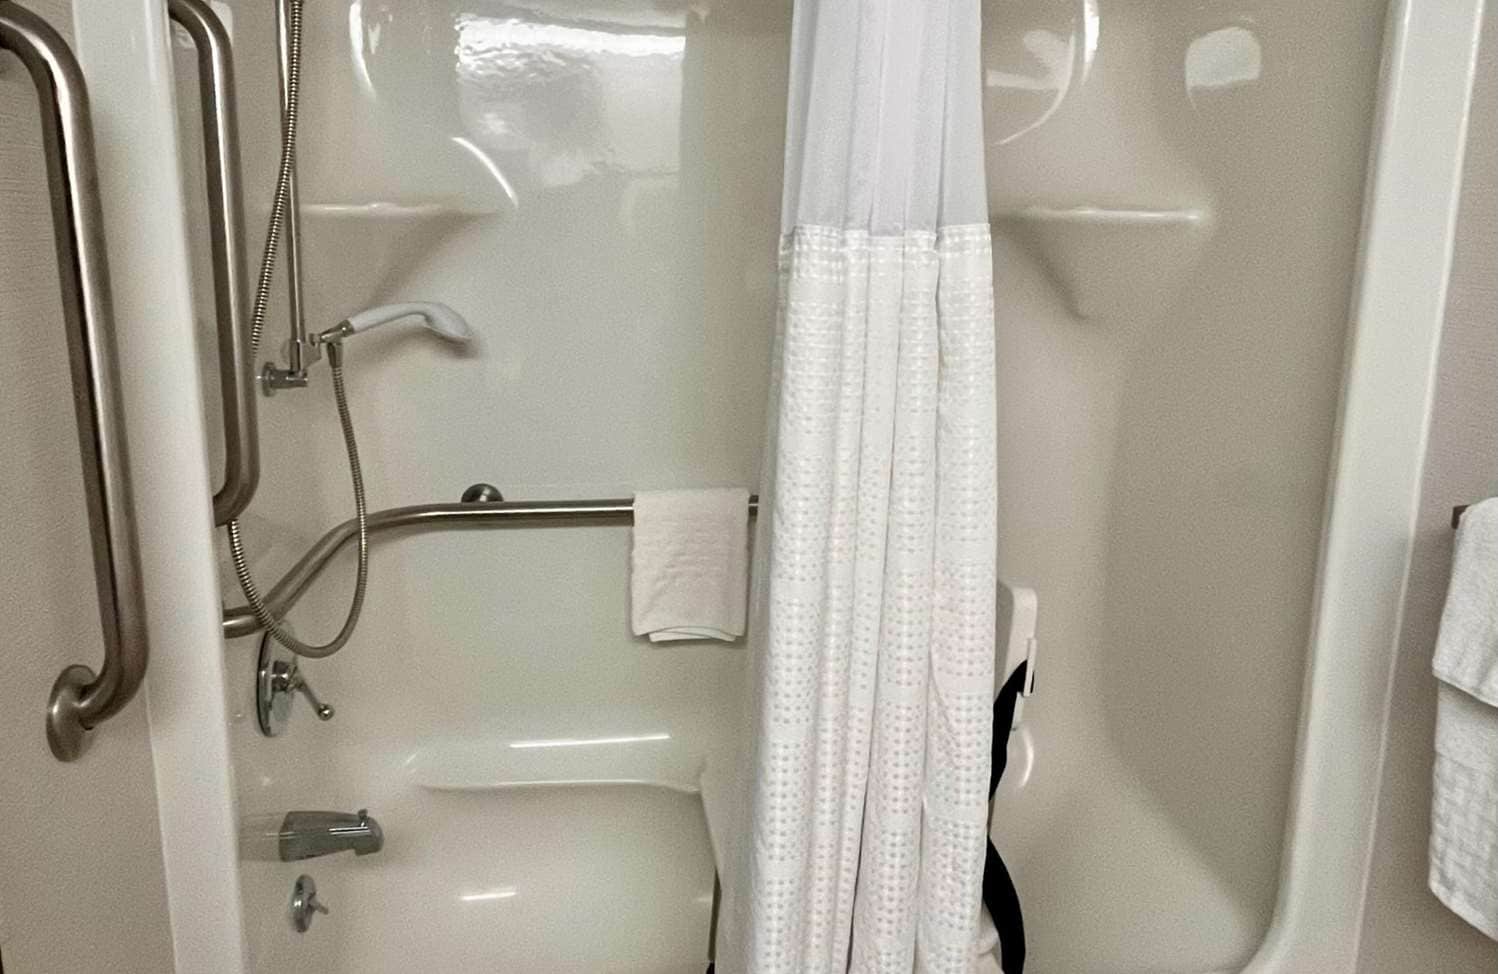 Cruise Shower Caddy (For Any Cruise Line,Travel,RV)